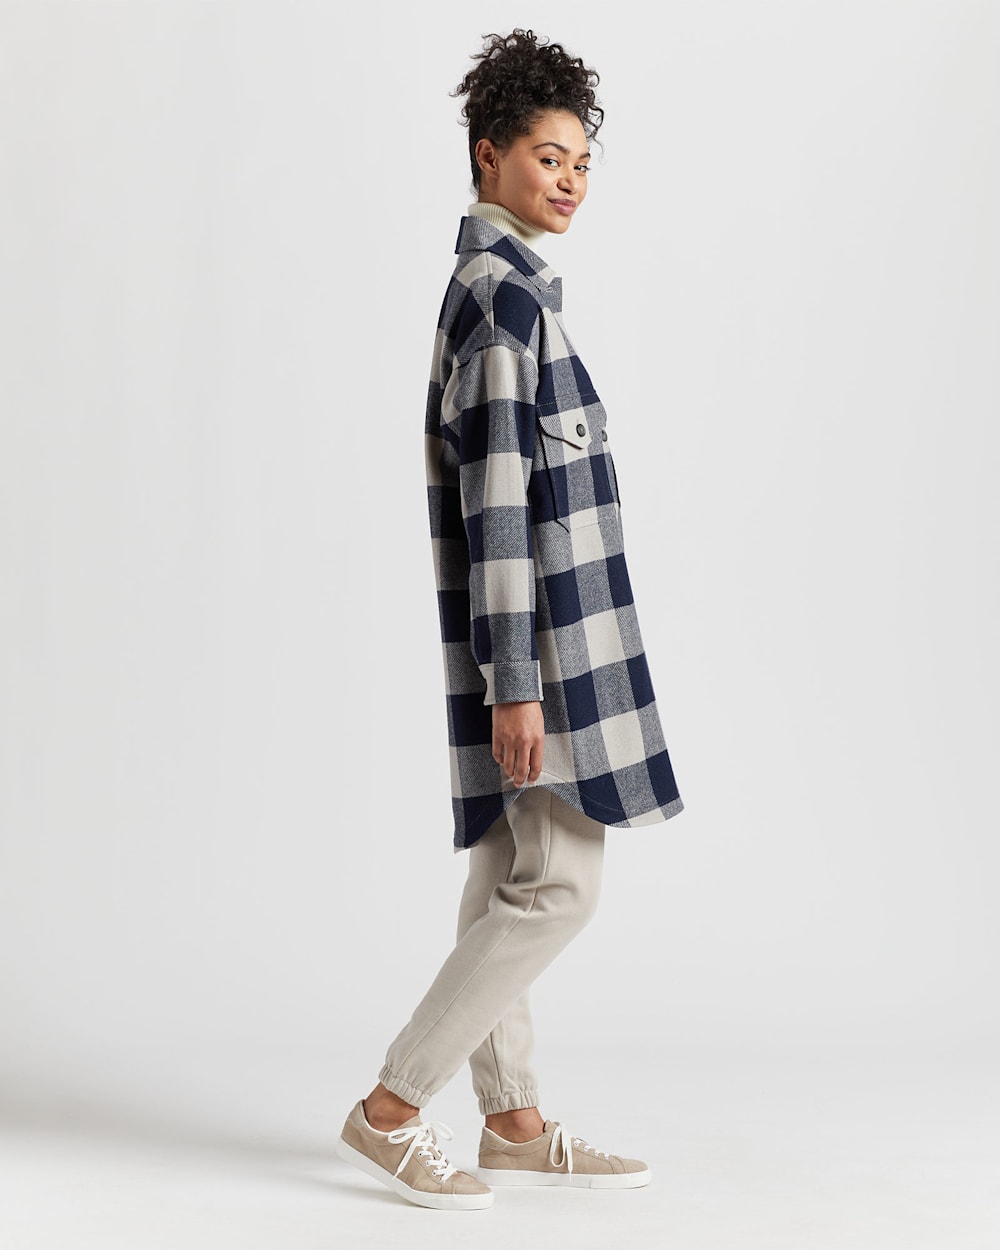 ALTERNATE VIEW OF WOMEN'S OVERSIZED WOOL SHIRT JACKET IN NAVY BUFFALO CHECK image number 2